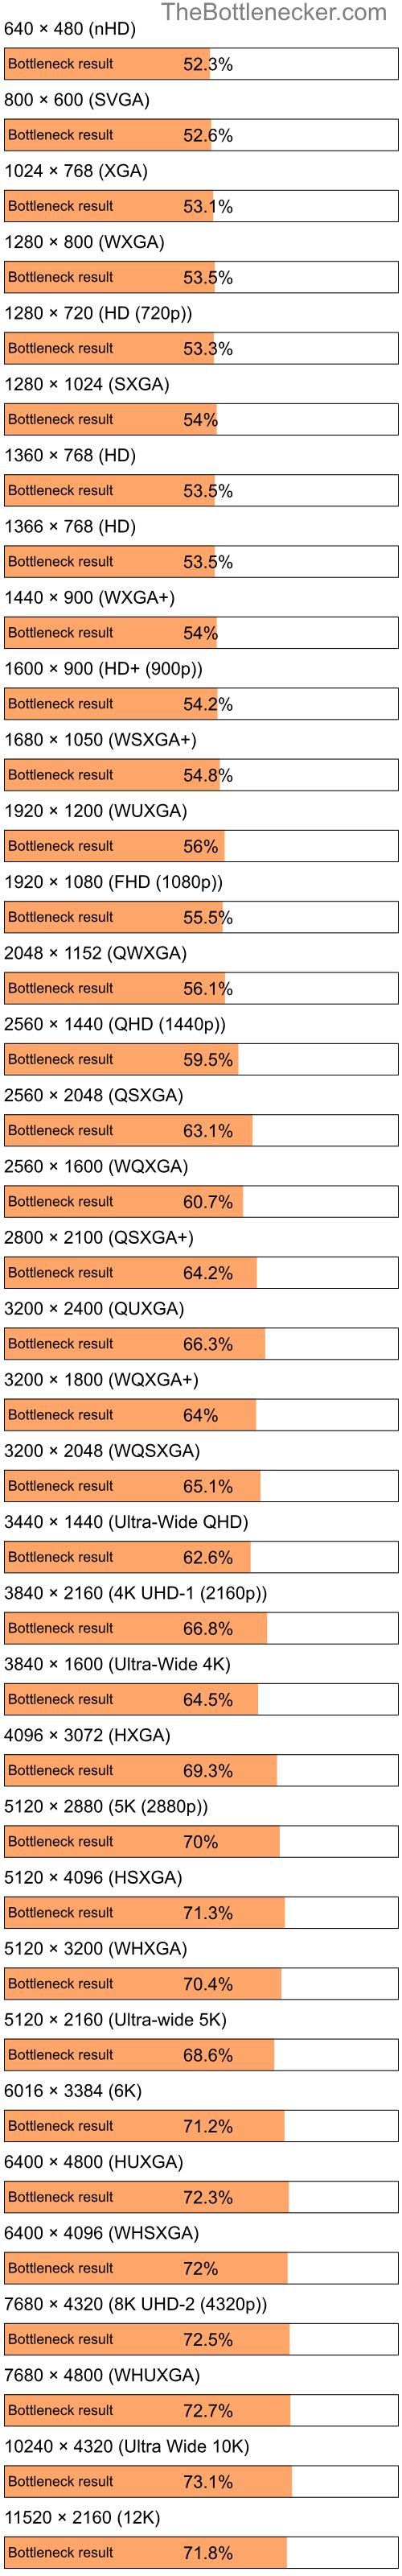 Bottleneck results by resolution for Intel Pentium 4 and NVIDIA GeForce 6800 XT in Processor Intense Tasks